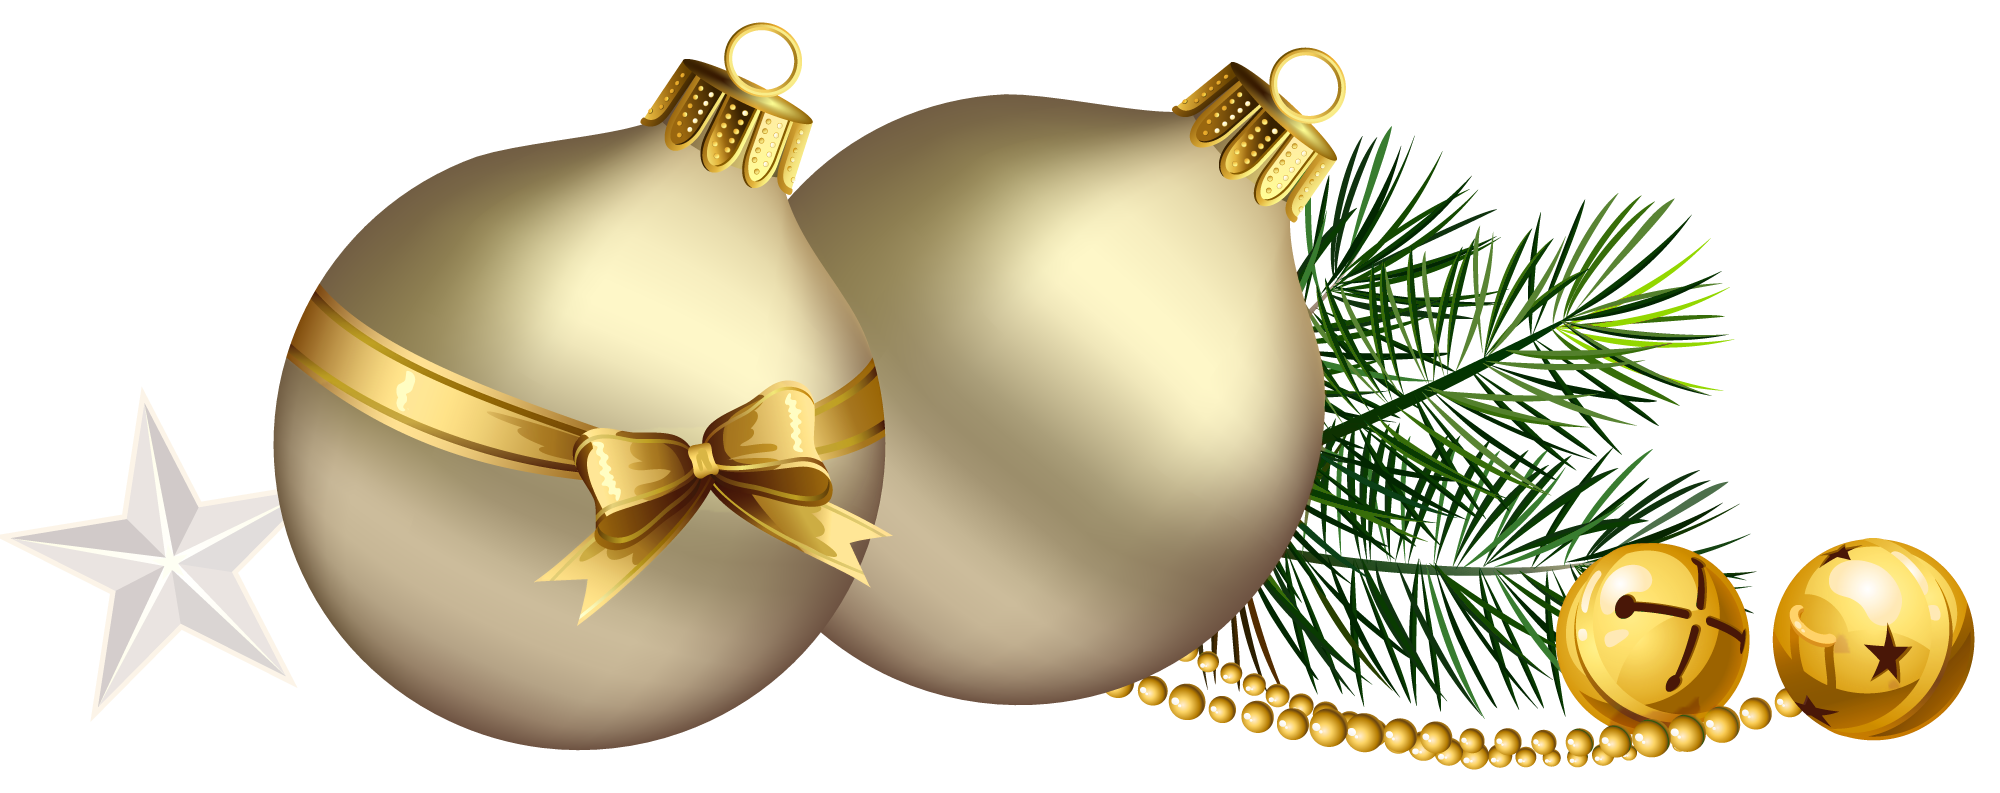 Gold Christmas Bauble PNG Background Image